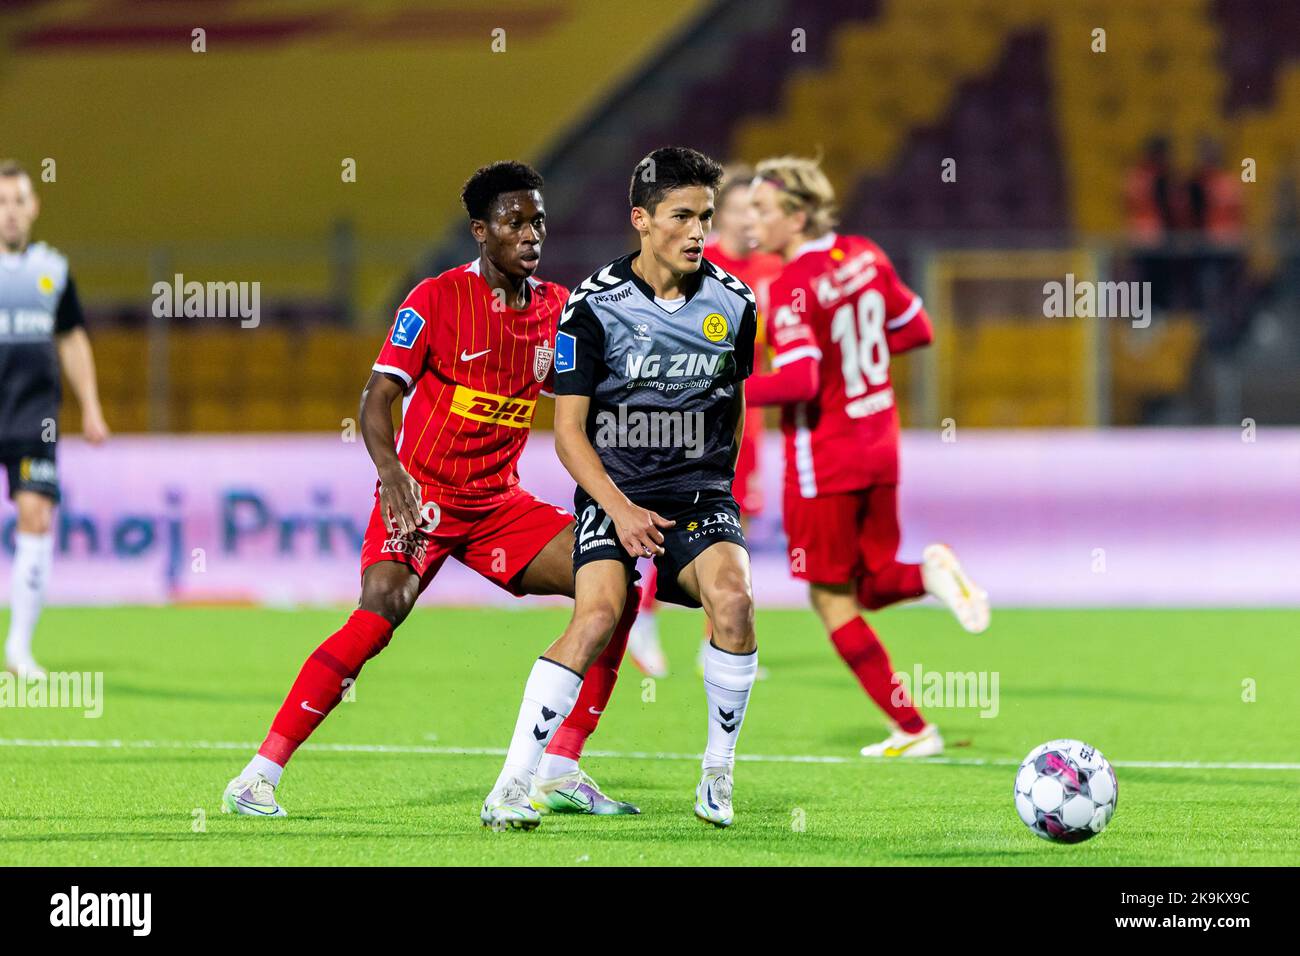 Farum, Denmark. 28th Oct, 2022. Elijah Just (27) of AC Horsens seen during the 3F Superliga match between FC Nordsjaelland and AC Horsens at Right to Dream in (Photo Credit: